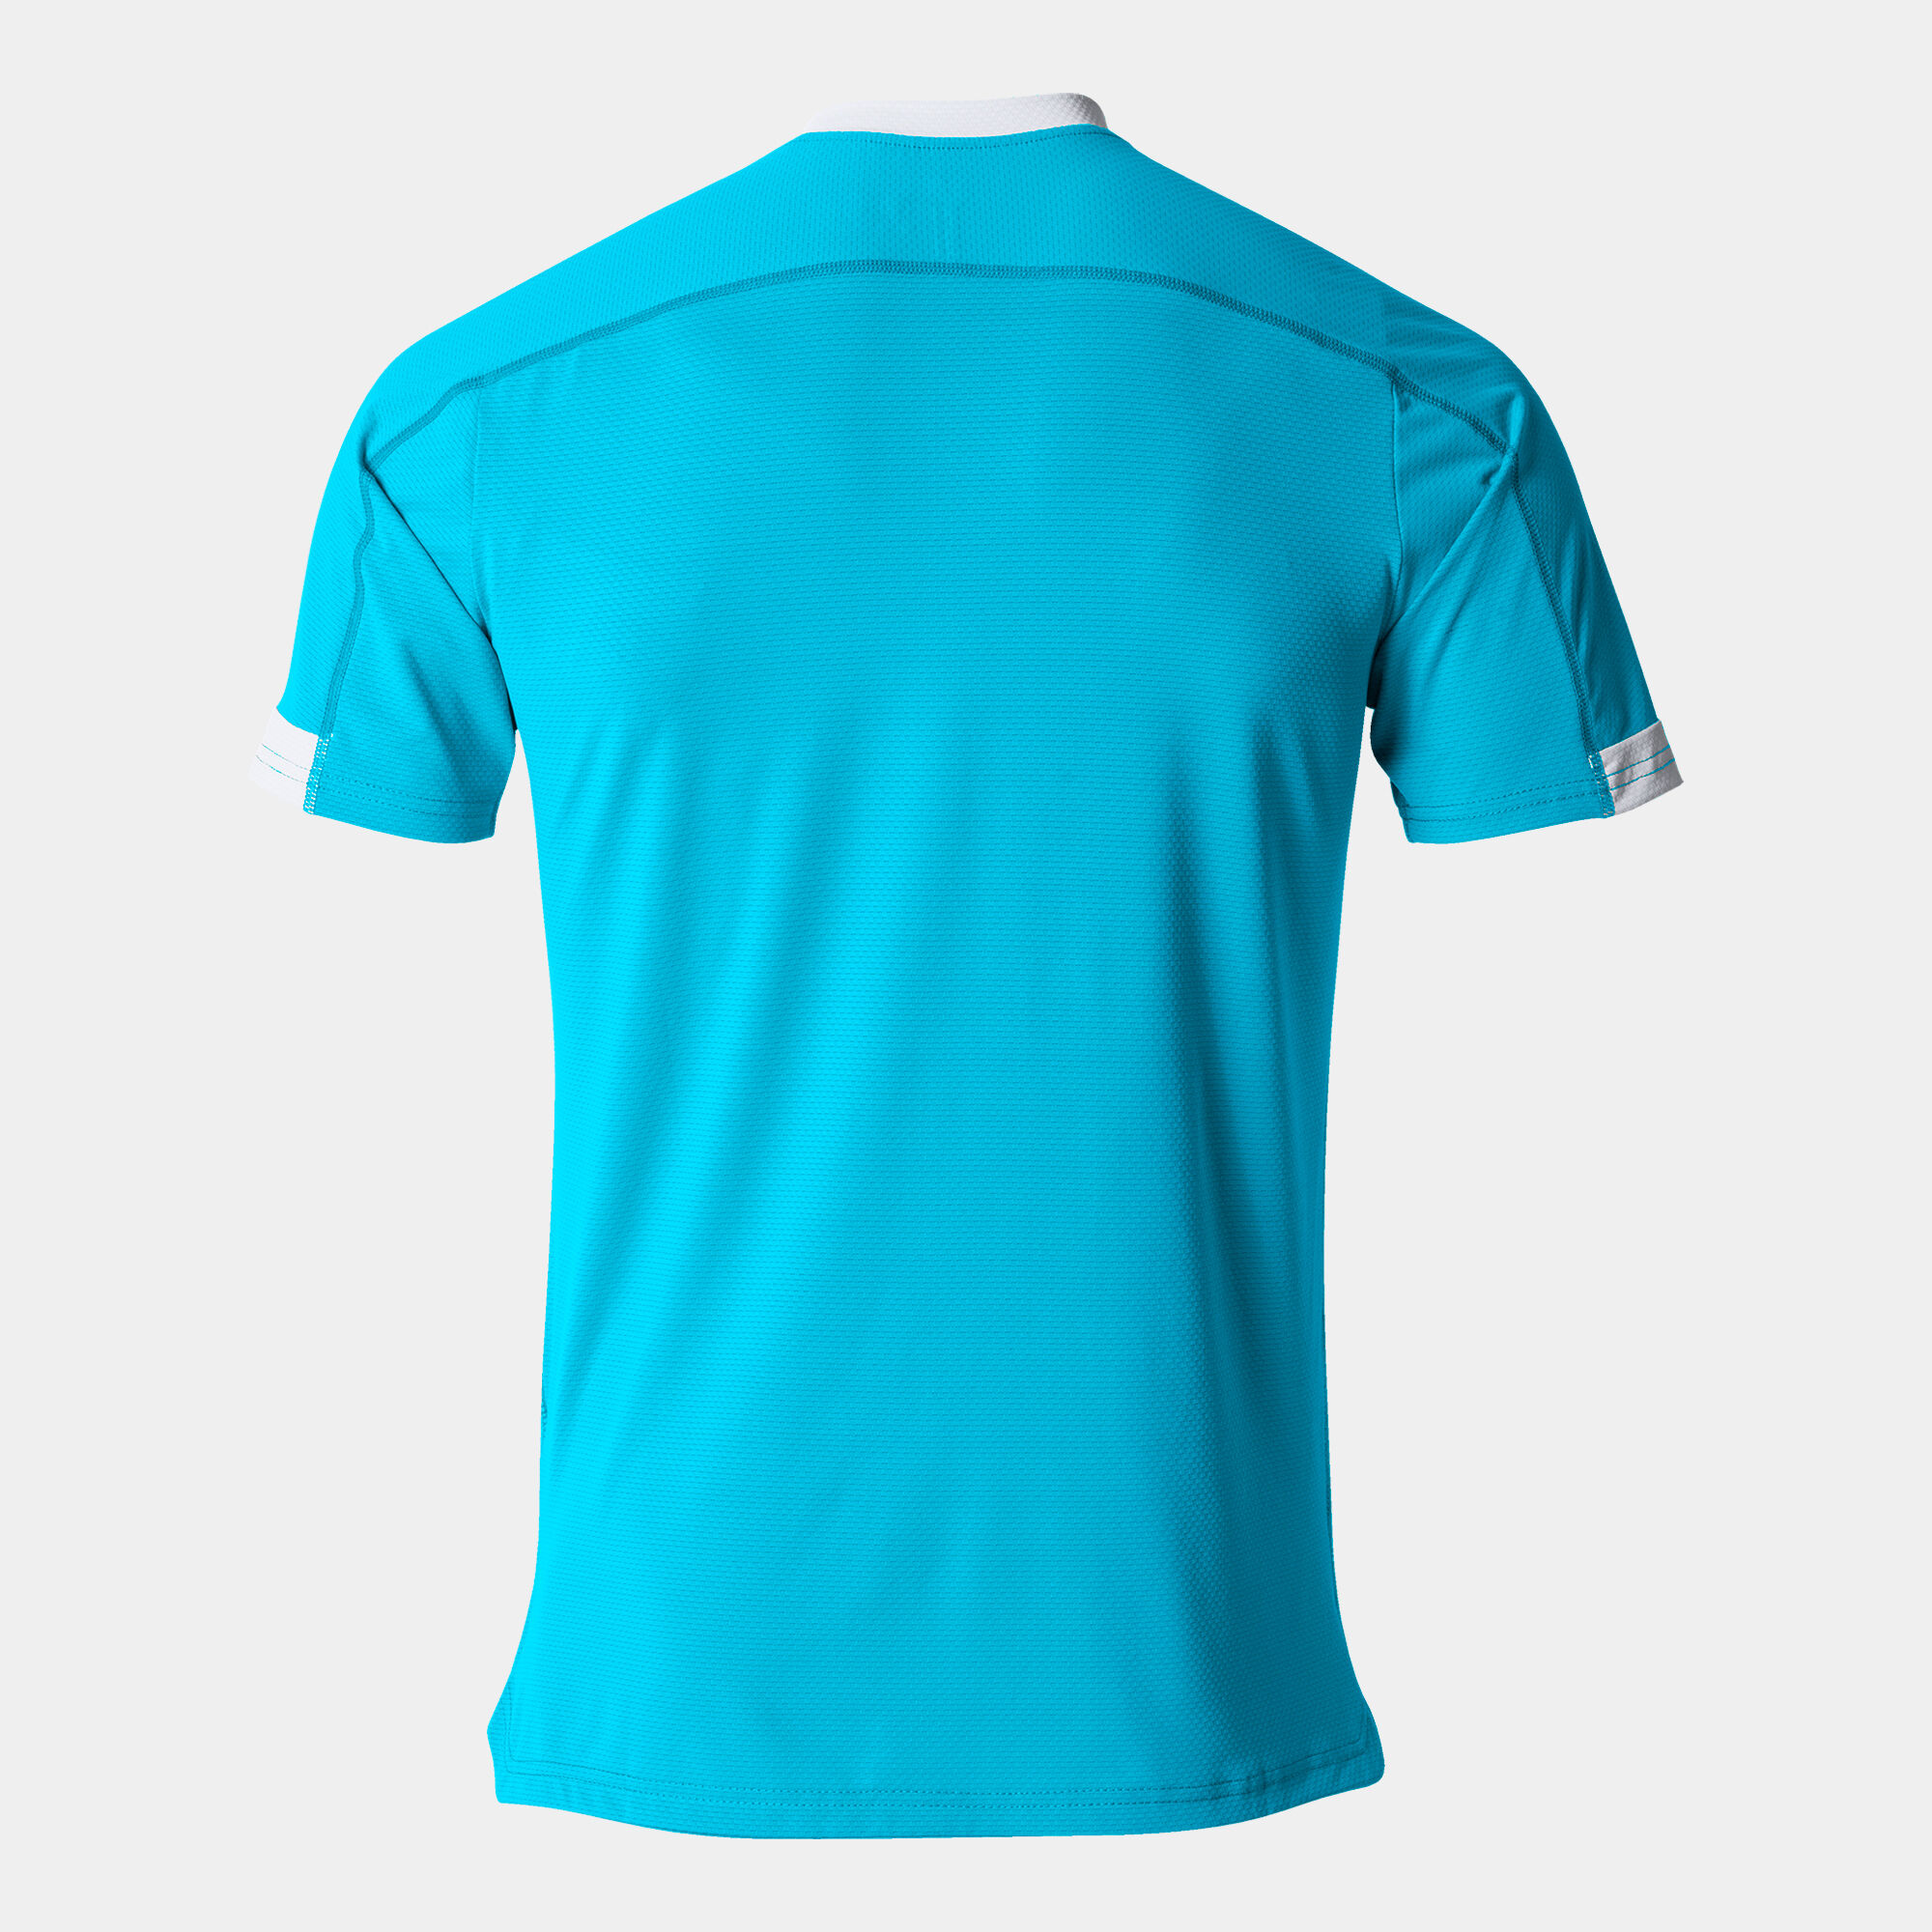 MAILLOT MANCHES COURTES HOMME SMASH TURQUOISE FLUO